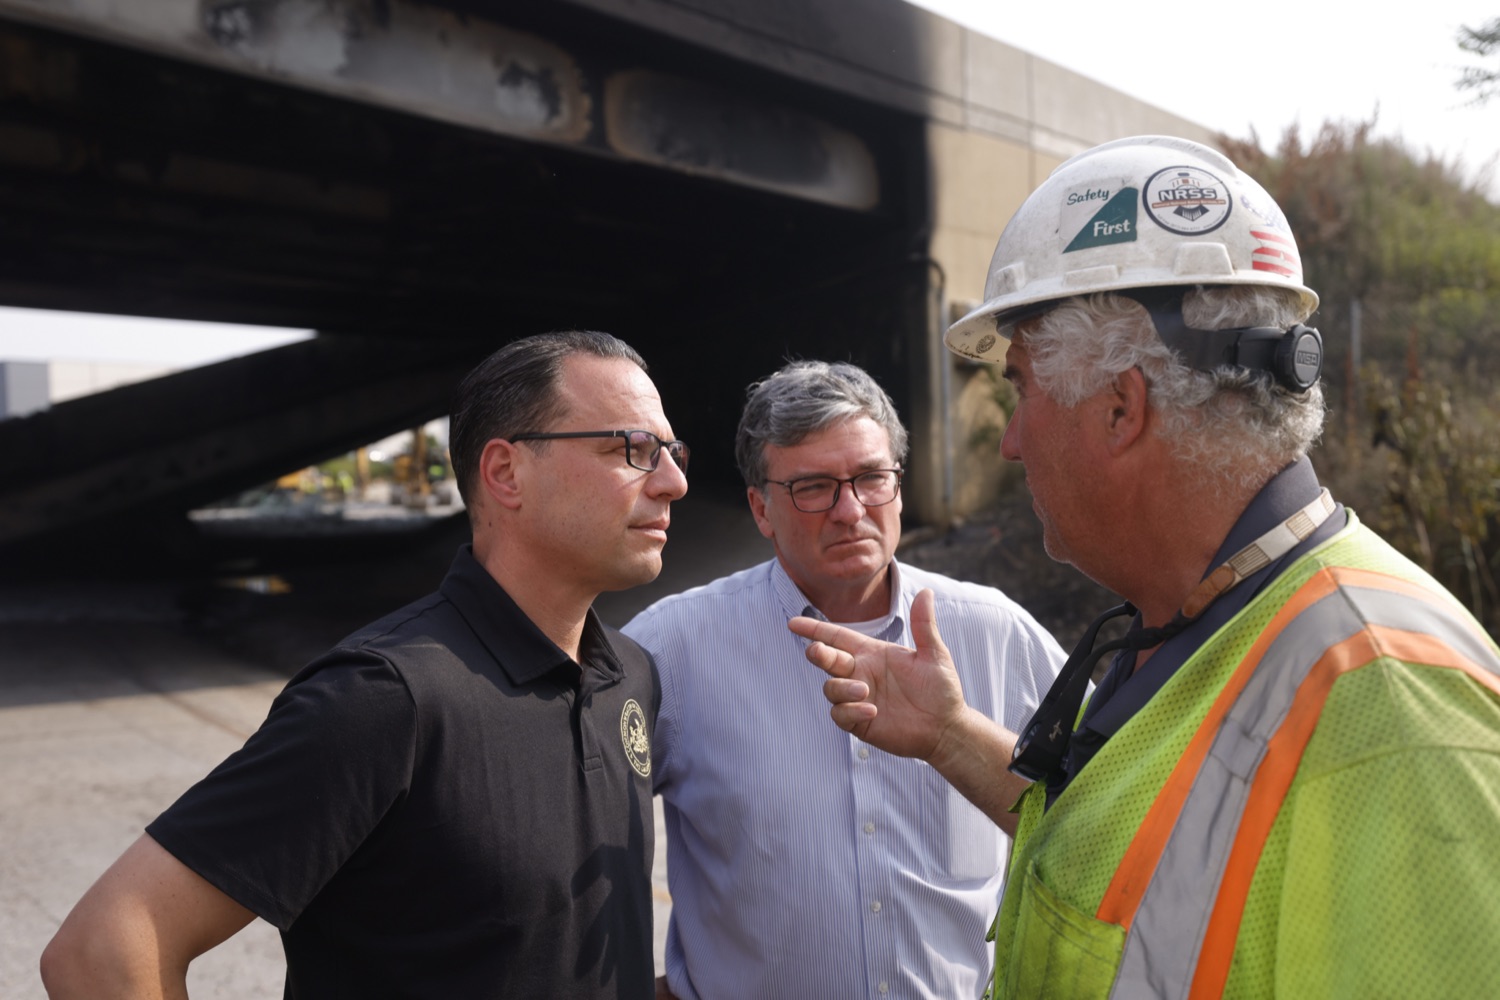 Workers at the site speak with Governor Josh Shapiro and PennDOT Secretary Mike Carroll about conditions.  Governor Josh Shapiro, along with officials from the Shapiro Administration, the City of Philadelphia, and SEPTA provided an update on the response to the vehicle fire on the Route 73/Cottman Avenue ramp under Interstate 95 in Philadelphia, which caused the roadway in this area to partially collapse, and heavily damaged the southbound structure. The interstate is closed in both directions..."Interstate 95 is a critical artery that supports our economy and plays an important role in Pennsylvanians' day to day lives. My Administration is all hands on deck to repair this safely and as efficiently as possible," said Governor Shapiro. "We will rebuild and recover - and in the meantime, we will make sure people can get to where they need to go safely."..This morning, according to first responders in Philadelphia and the Pennsylvania State Police, at approximately 6:20am, a vehicle fire under I-95 near the Cottman Avenue exit in Northeast Philadelphia caused a portion of the highway to collapse. Preliminary reports indicate a commercial truck carrying a petroleum-based product was the source of the fire. Since the crash occurred, PEMA has also been on-site, coordinating response efforts with local and federal partners.  JUNE 11, 2023 - PHILADELPHIA, PA.<br><a href="https://filesource.amperwave.net/commonwealthofpa/photo/23248_gov_I95Collapse_dz_026.JPG" target="_blank">⇣ Download Photo</a>